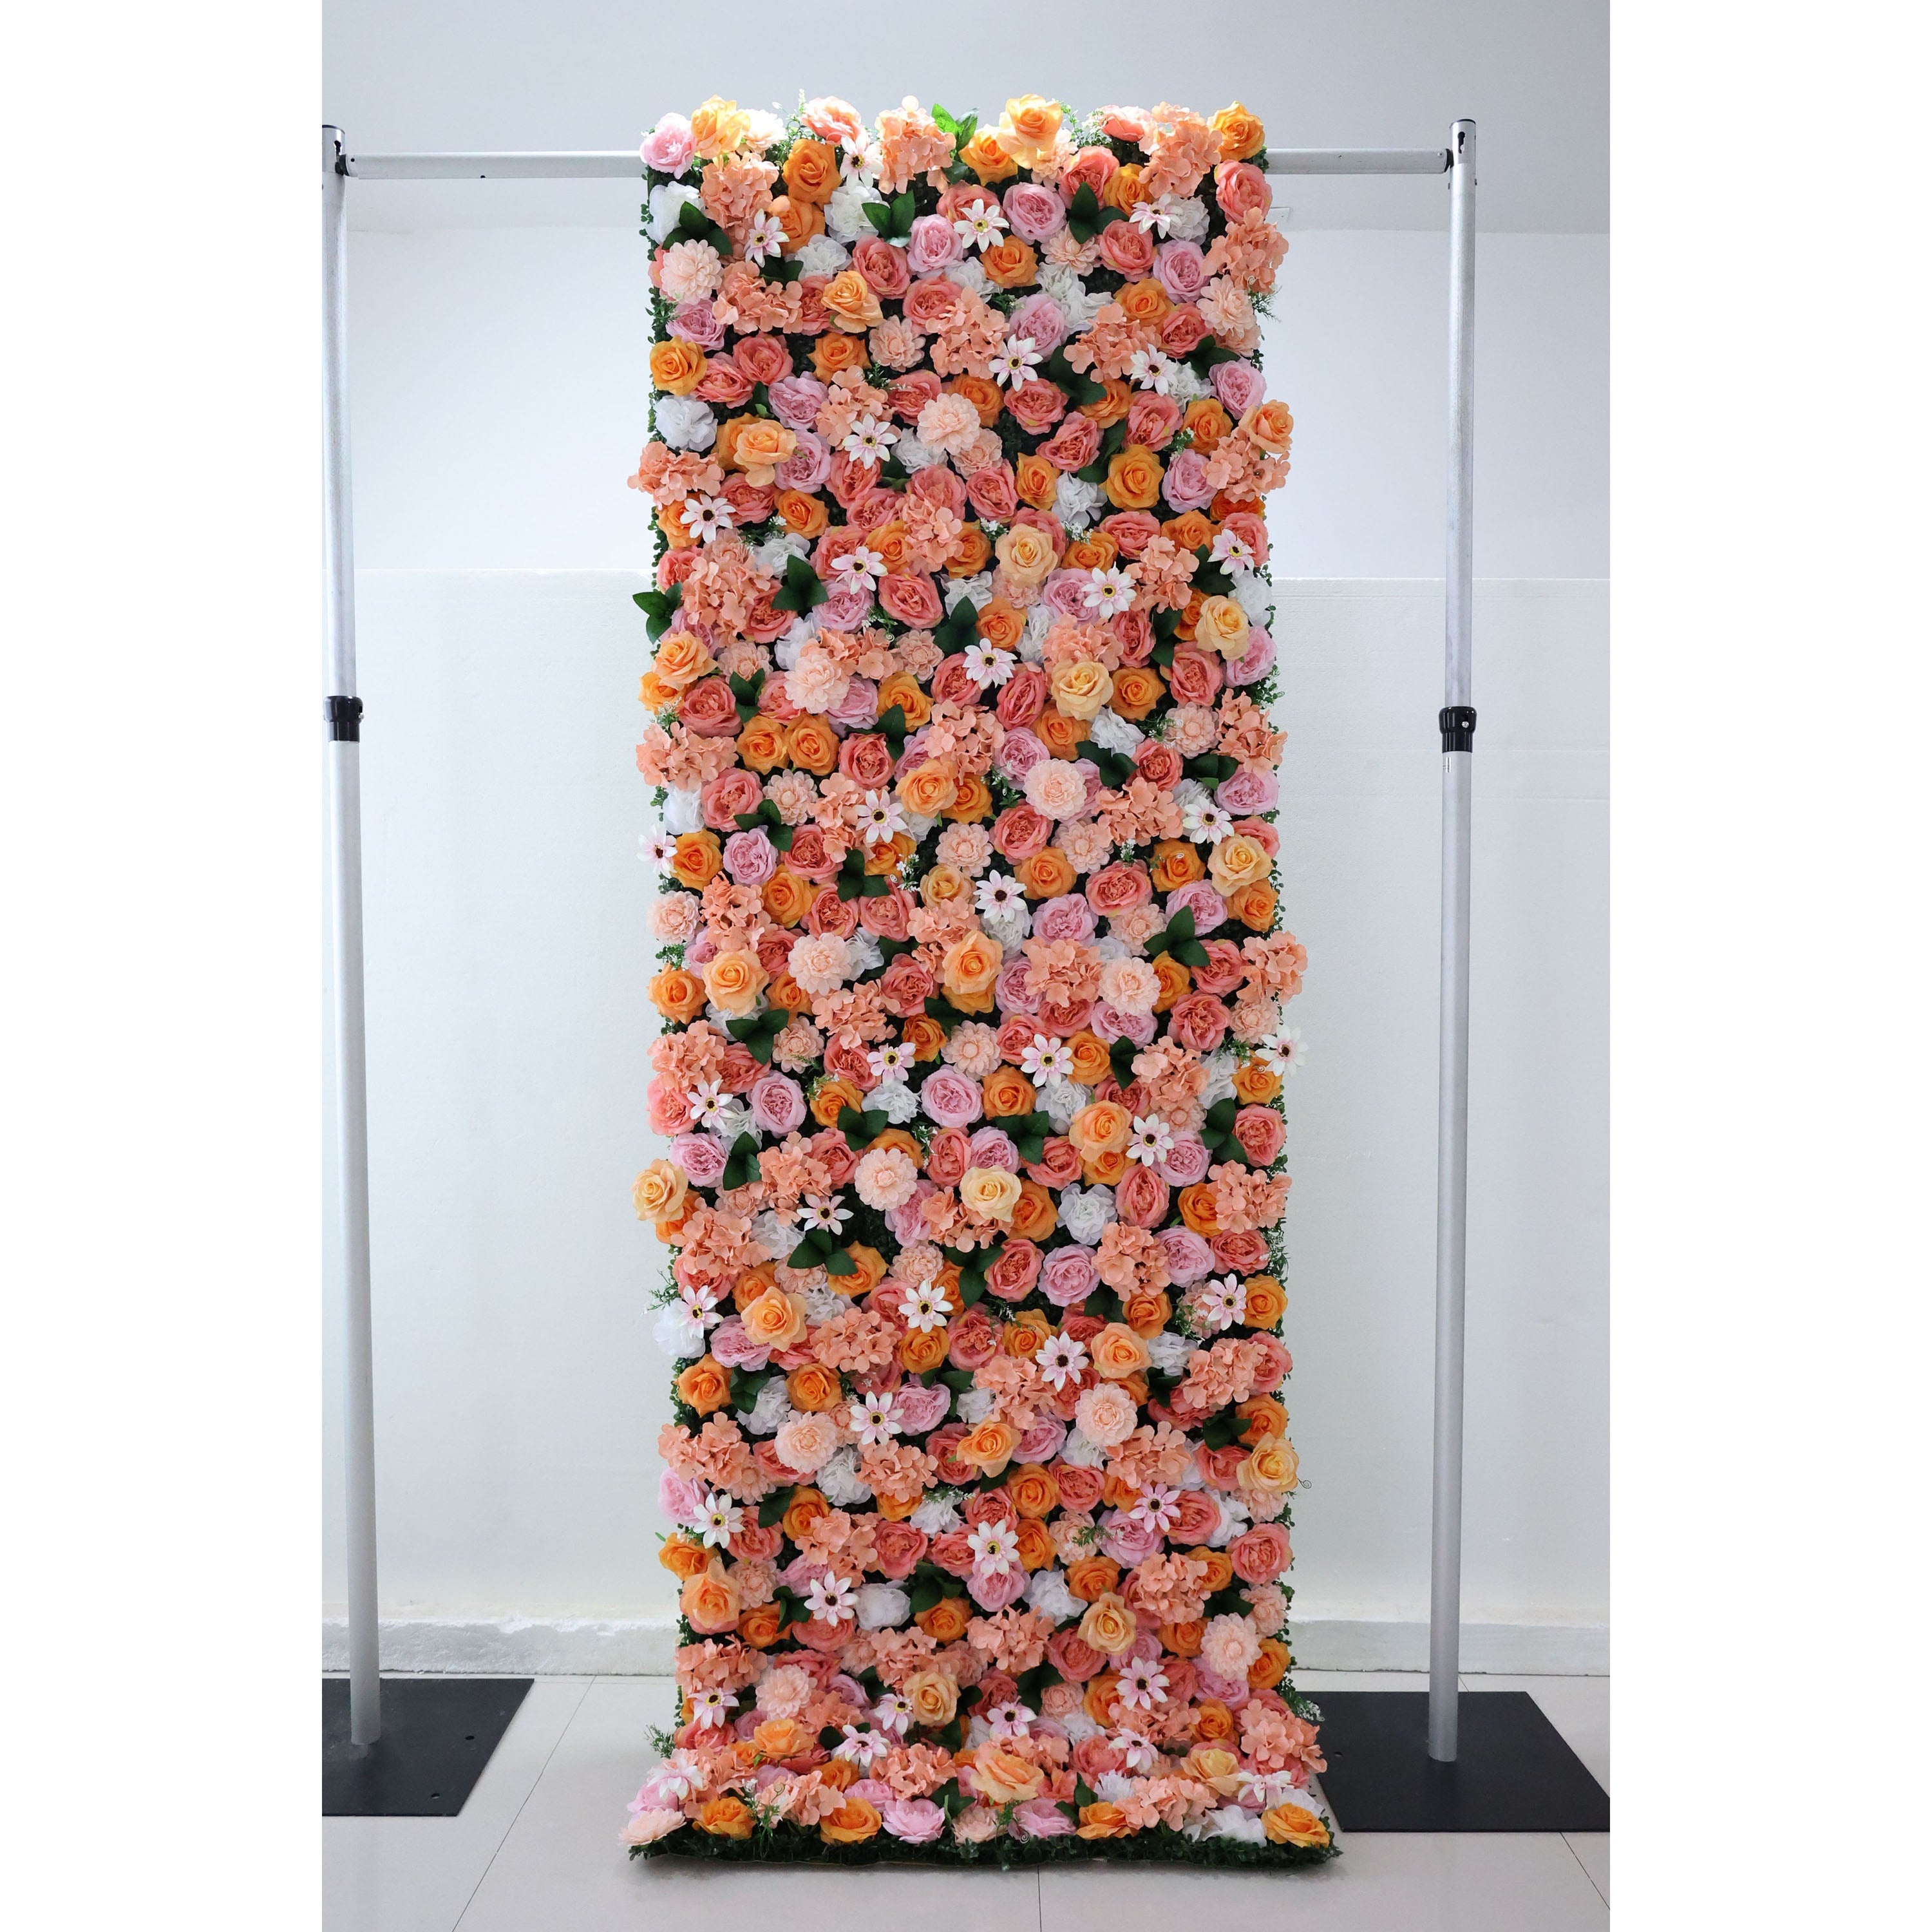 Valar Flowers roll up fabric artificial flower wall for wedding backdrop, floral design VF-3433